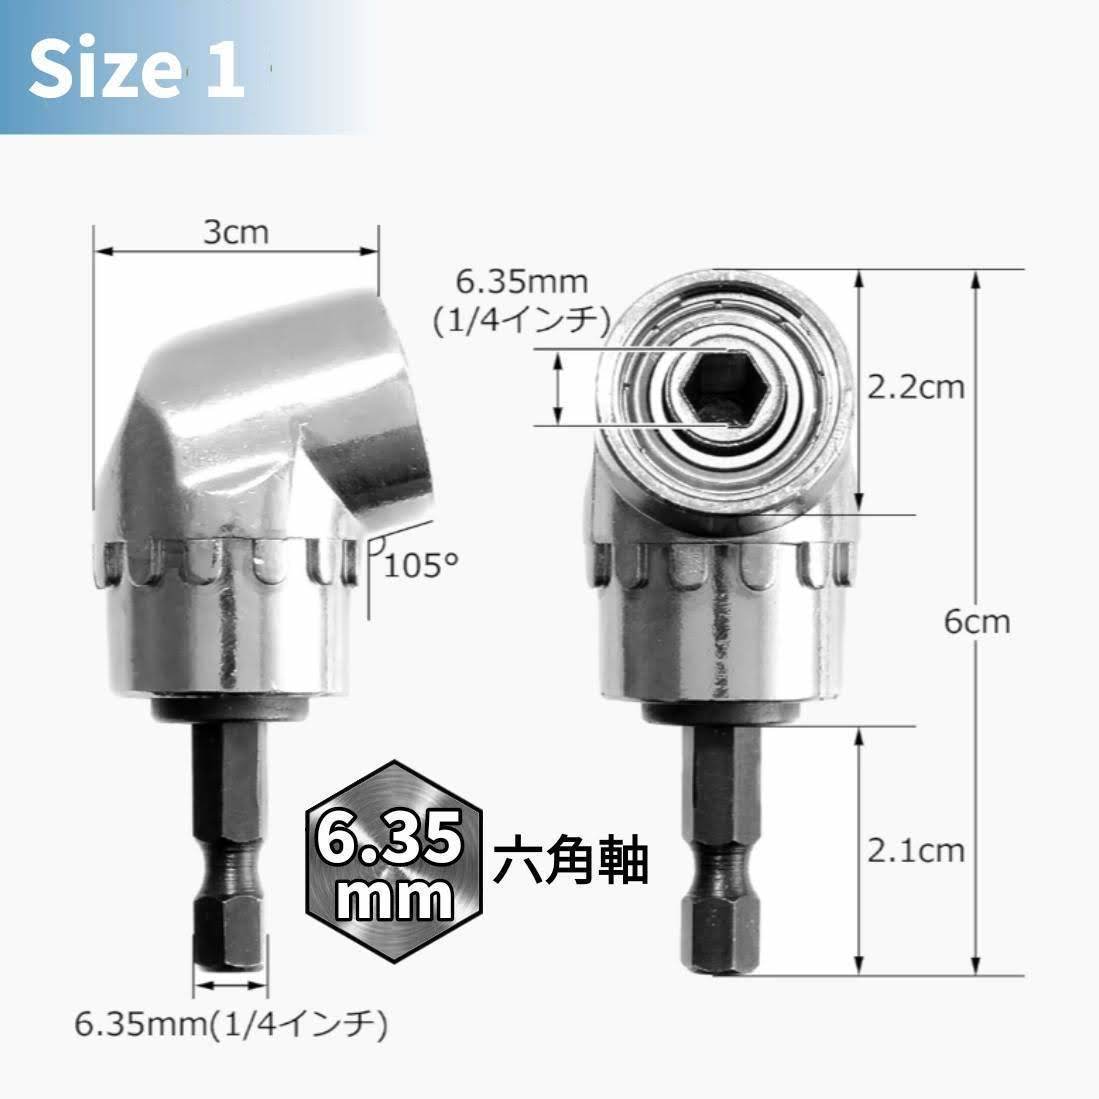  socket adaptor 7 point L type angle adaptor impact driver hexagon axis tool electric conversion drill extension bit diy Attachment 